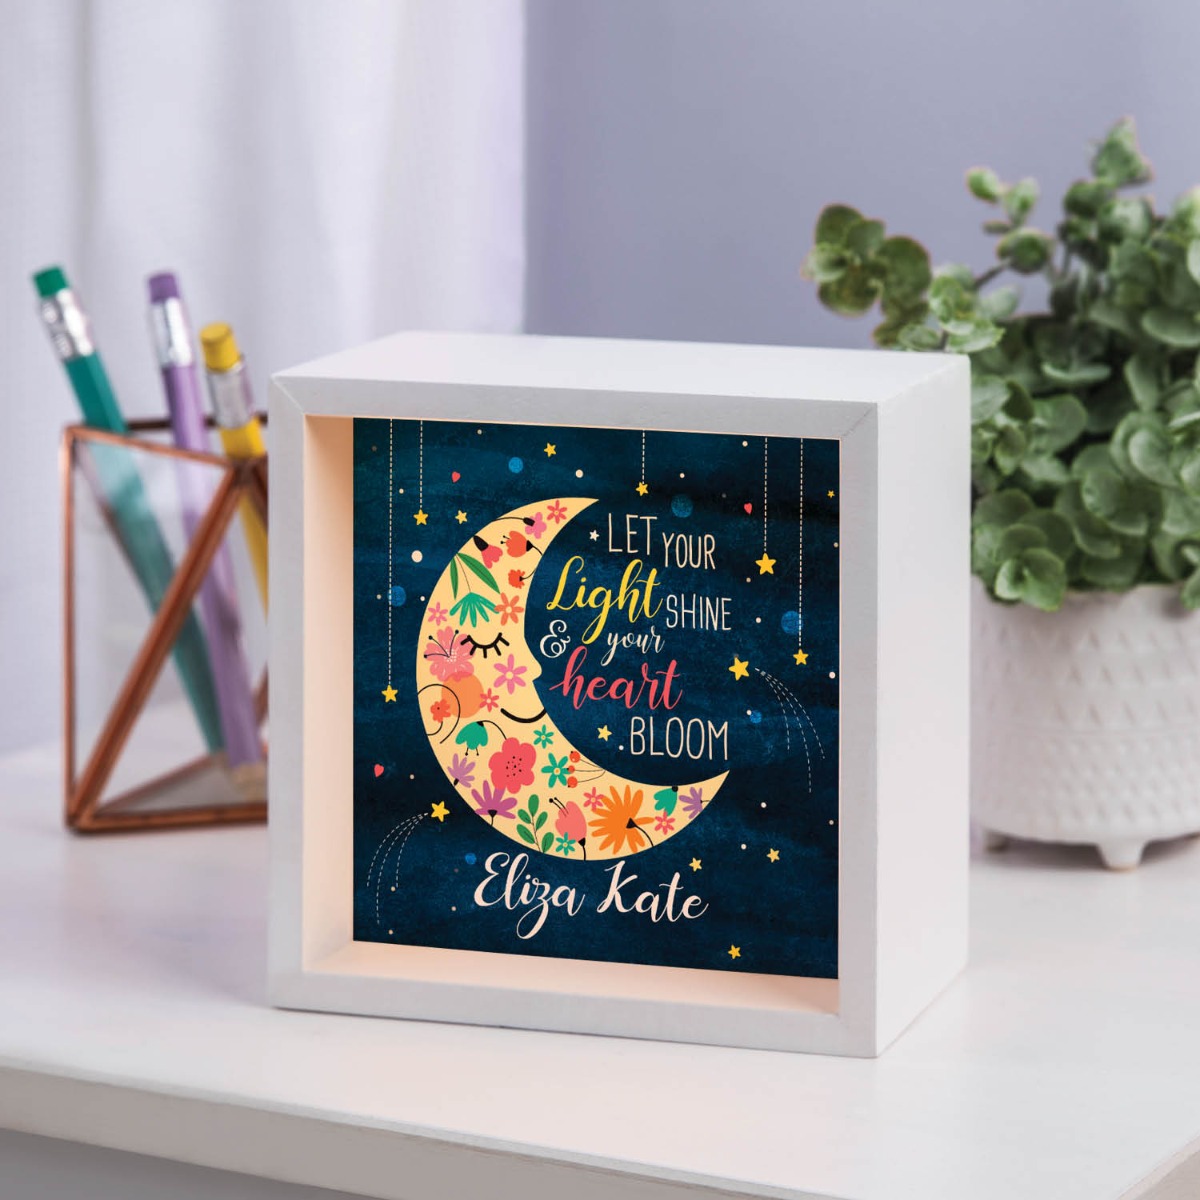 Let your light shine shadowbox with names